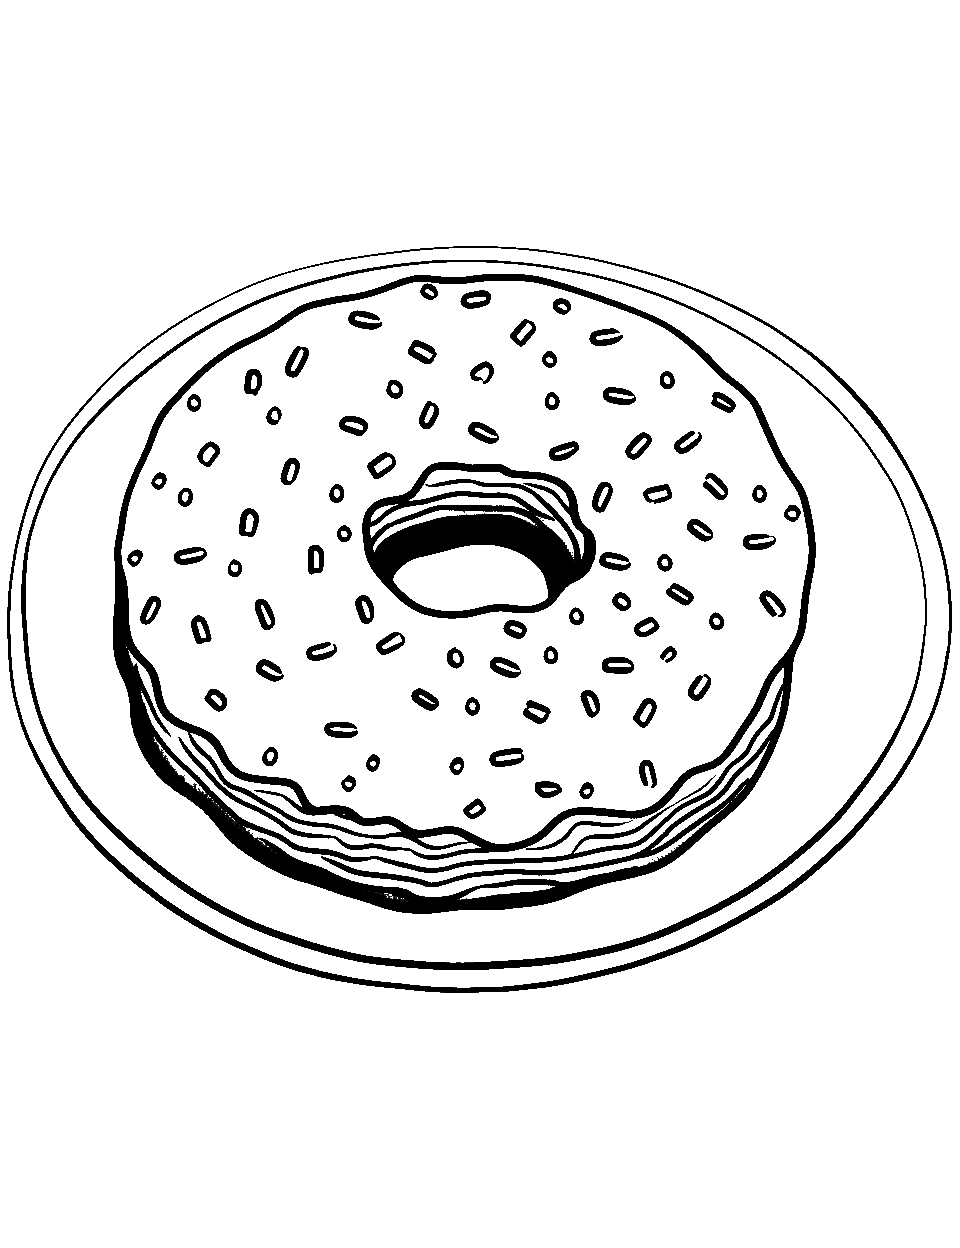 Donut Delight Food Coloring Page - A donut with sprinkles on a plate.